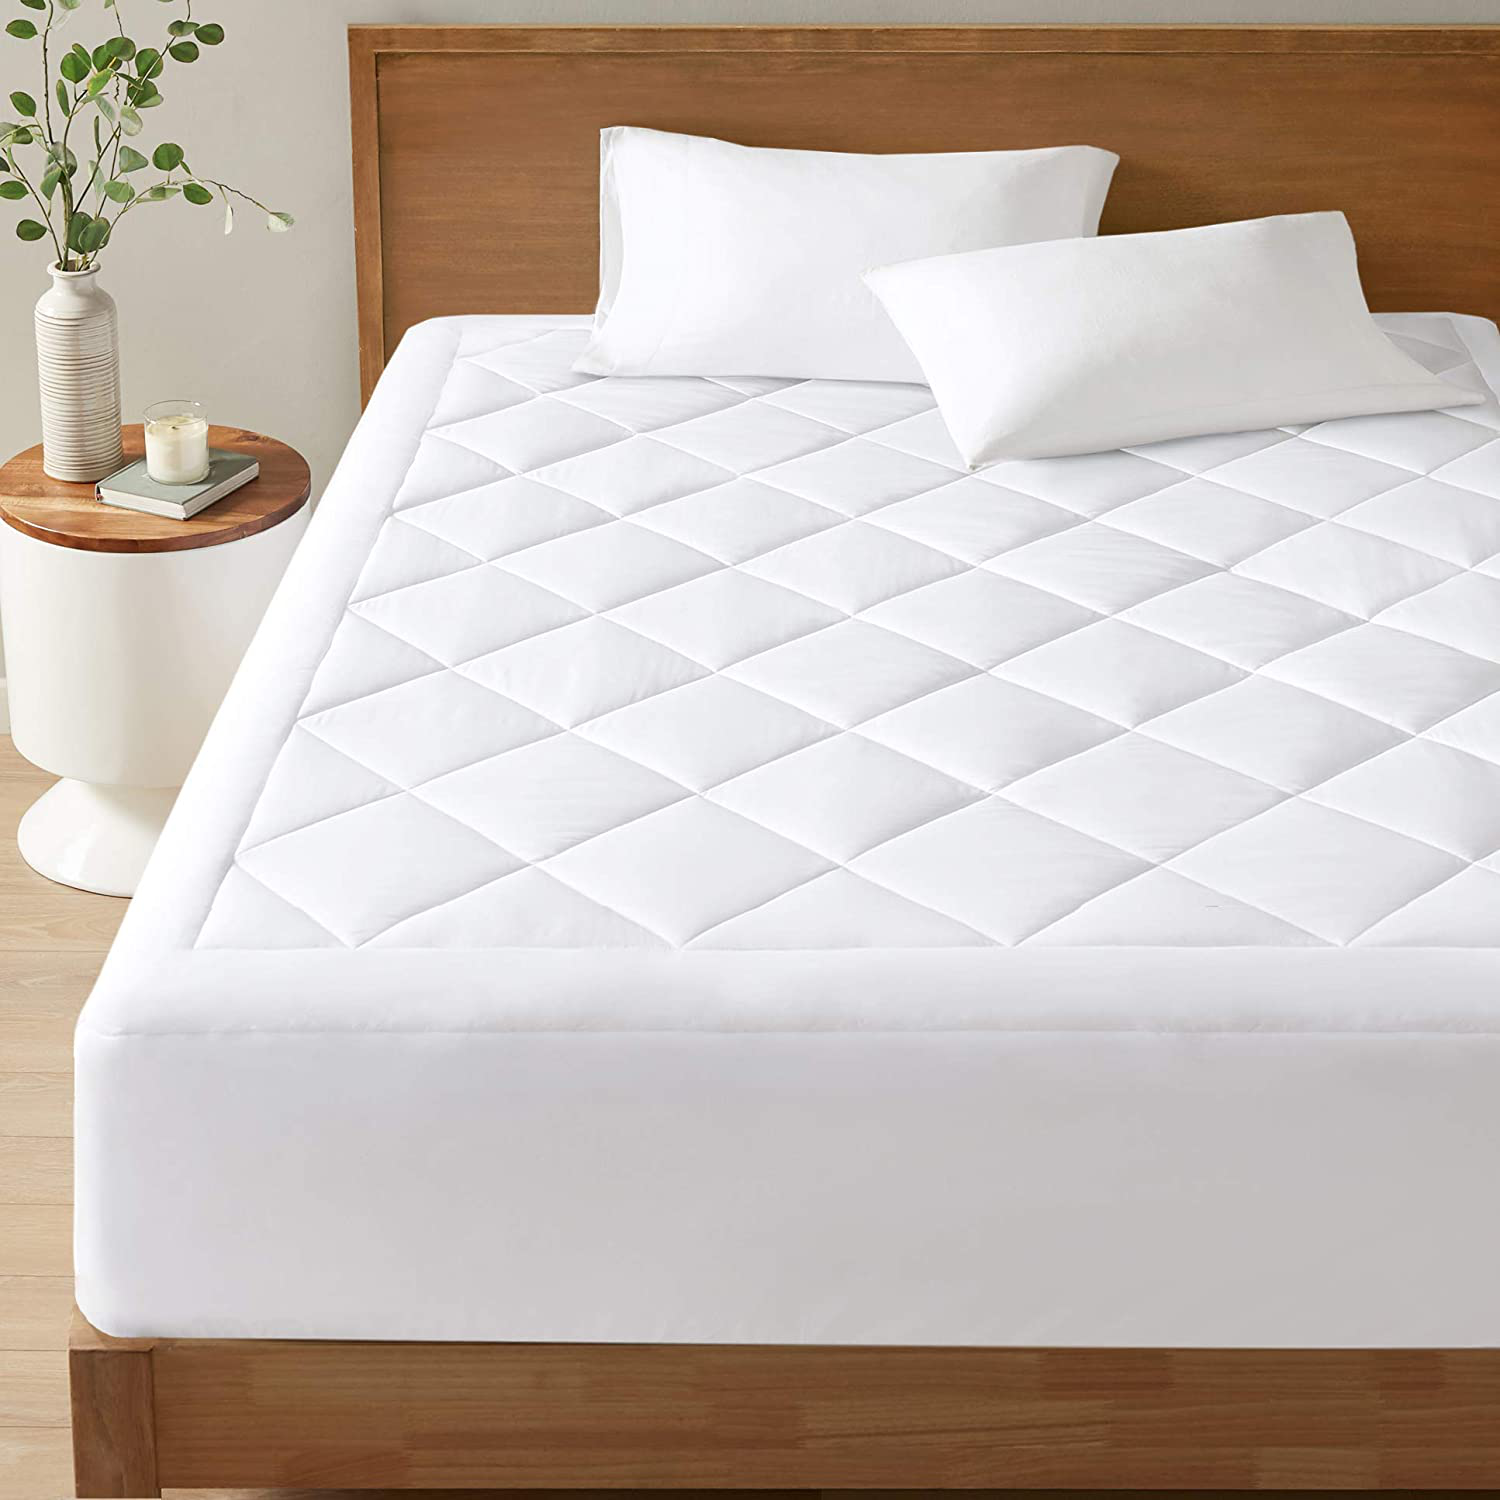 Degrees of Comfort Premium Soft Waterproof Mattress Pad King Size | Quilted Topper Fitted 15'' Inch Deep Pocket 3M Scotchgard Stain Resistant Protector Cover | Cooling, Washable, Breathable